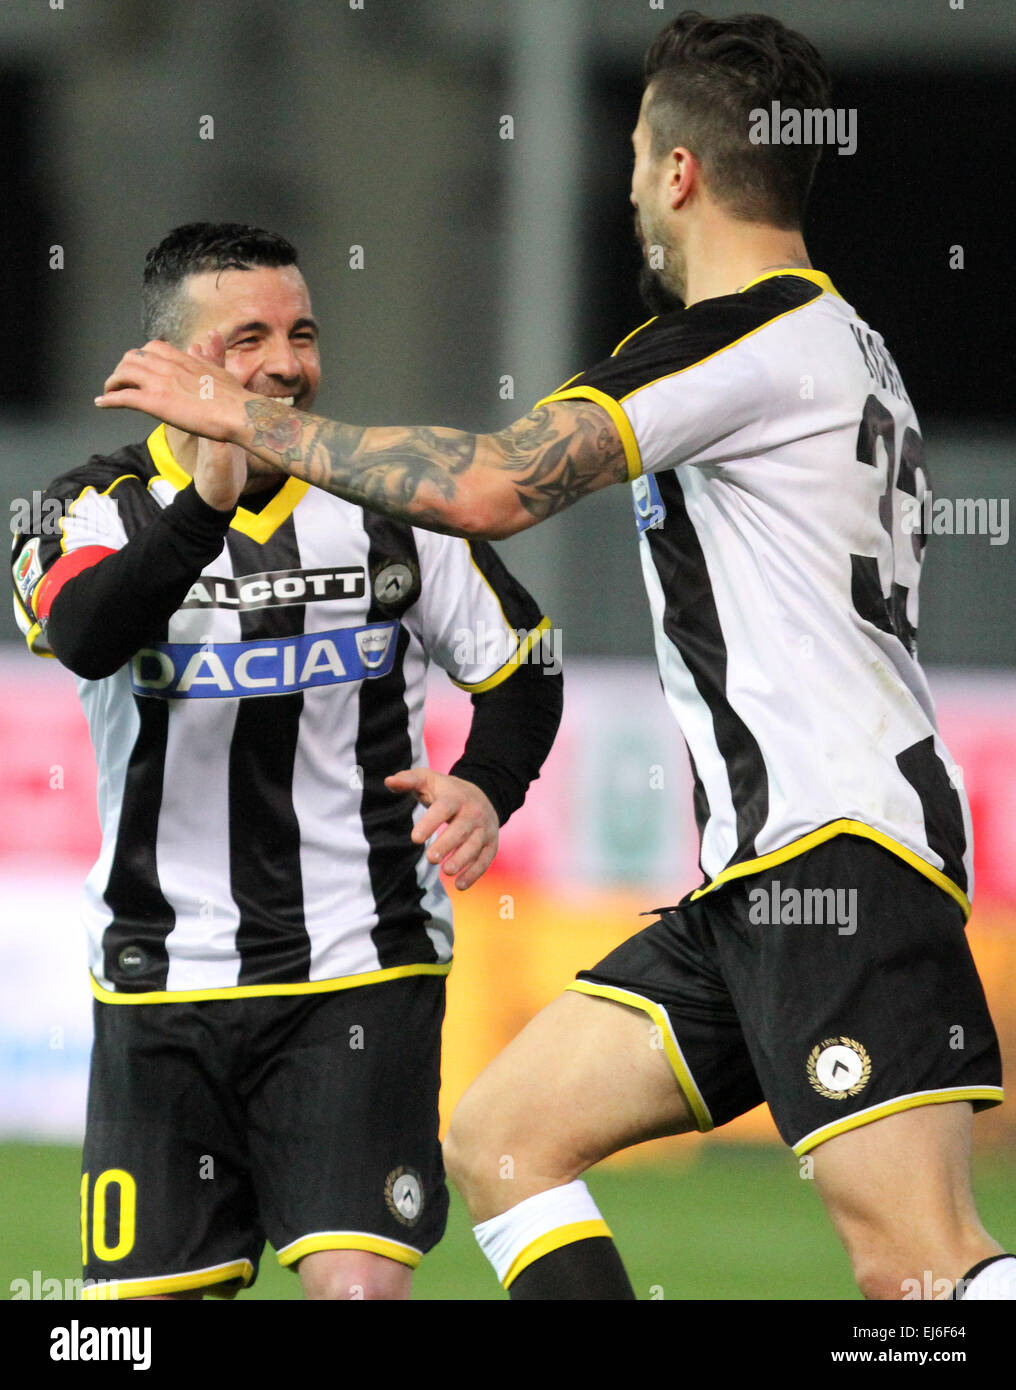 Udine, Italy. 22nd March, 2015. Udinese's midfielder Panagiotis Kone celebrates after scoring goal 2-2 with Udinese's forward Antonio Di Natale during the Italian Serie A football match between Udinese and Fiorentina on Sunday 22 March 2015 at Friuli Stadium. Credit:  Andrea Spinelli/Alamy Live News Stock Photo